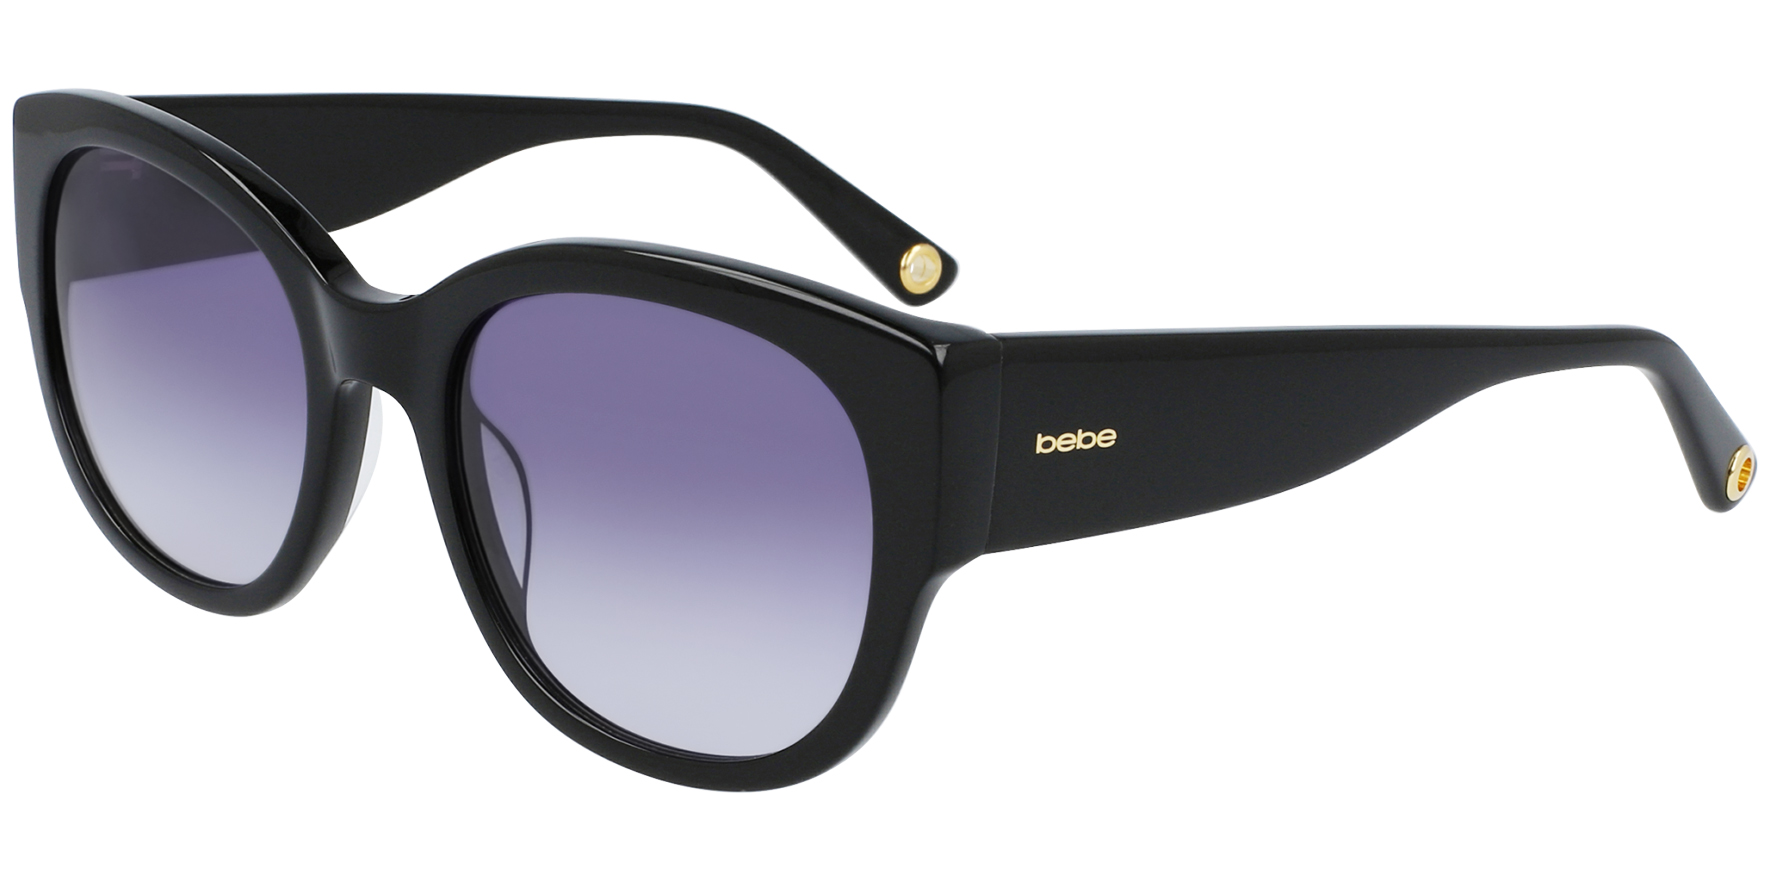 Bebe Women's Non-Polarized Sunglasses (various styles/colors) $20 + Free Shipping